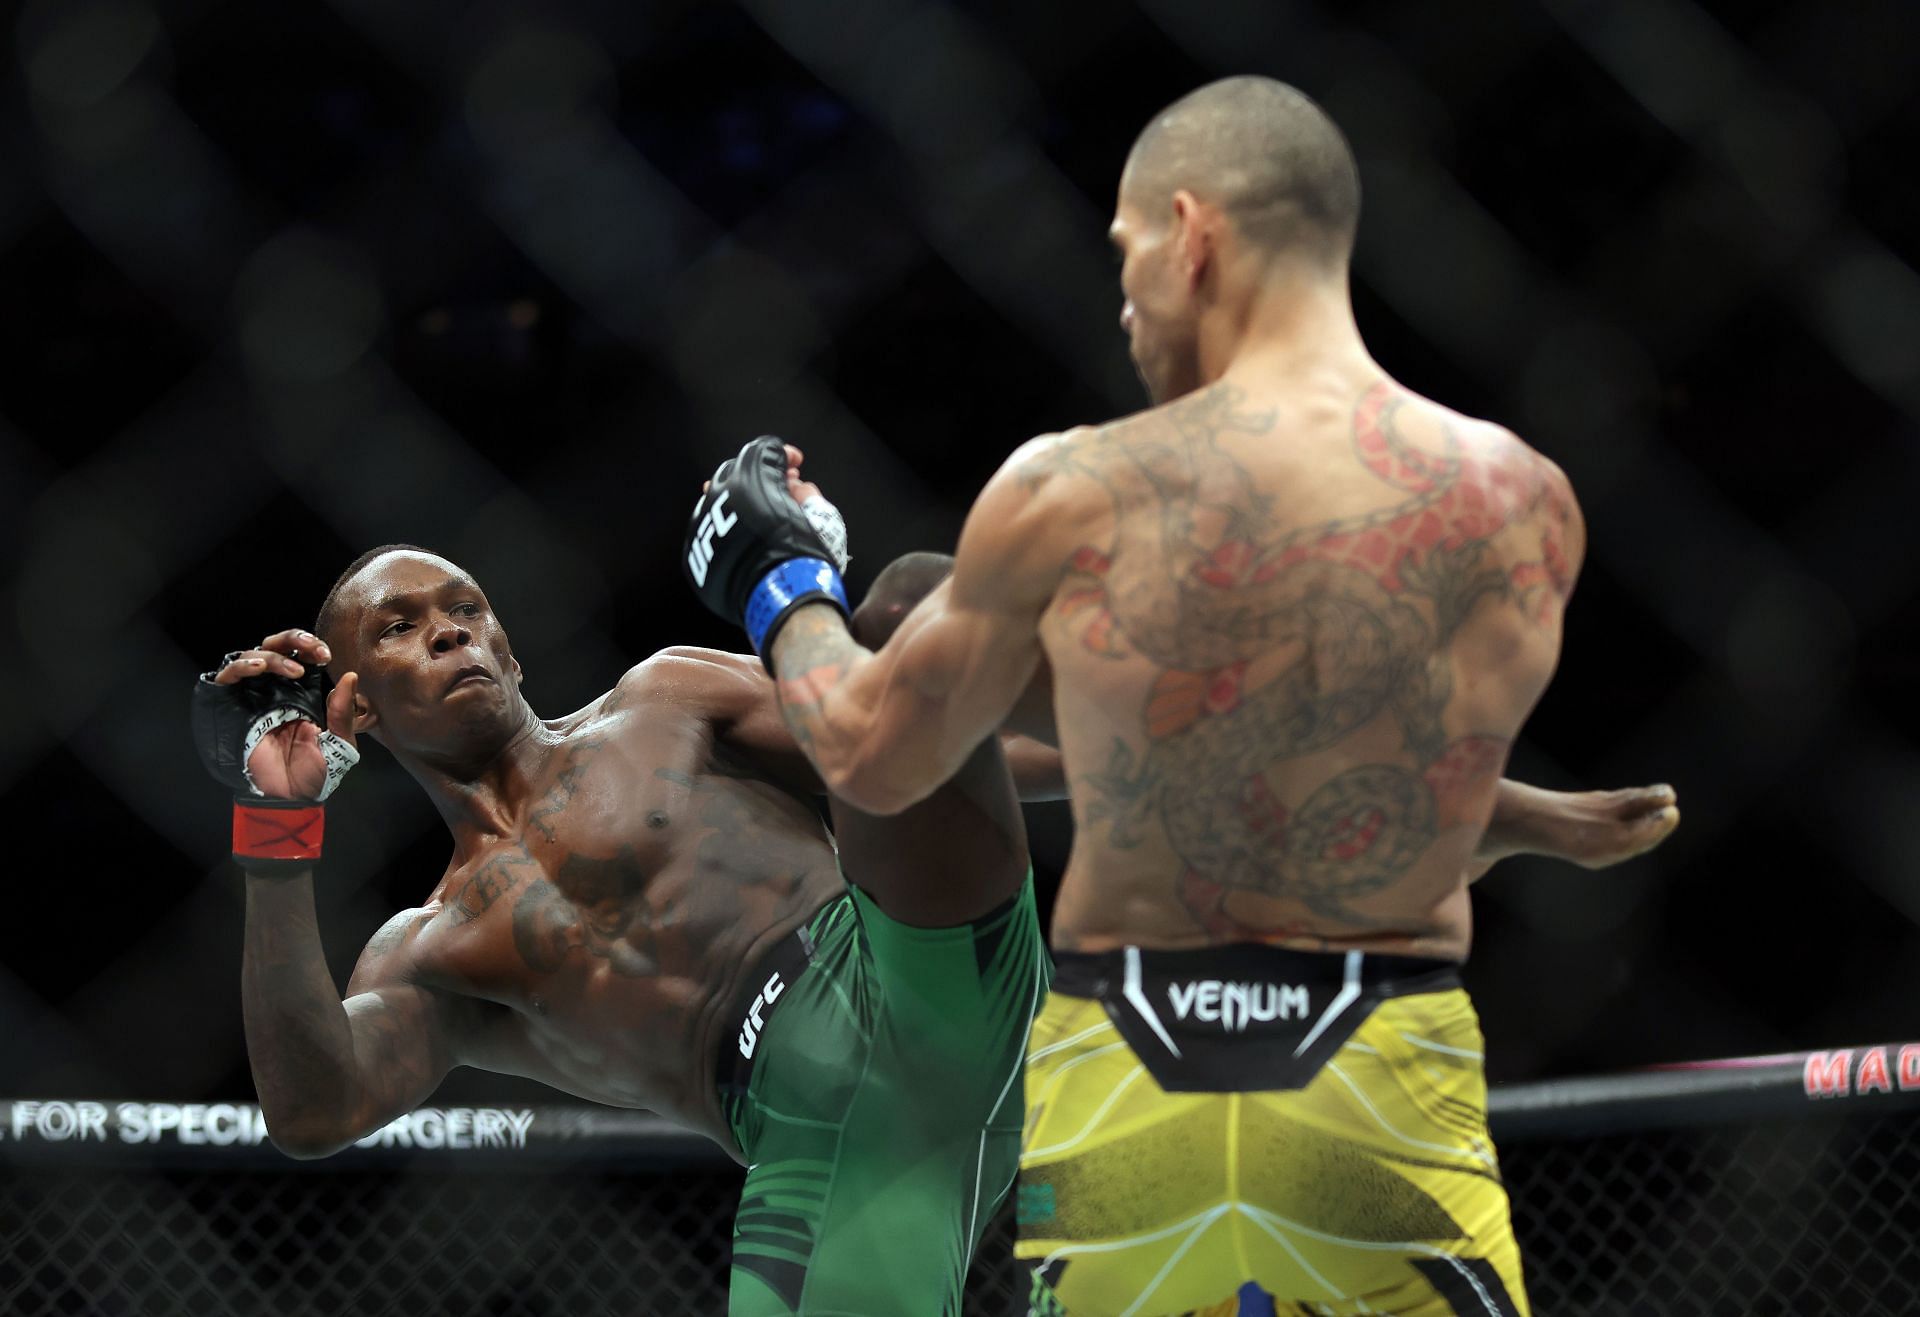 A couple of tweaks could see Israel Adesanya find a way to beat Alex Pereira